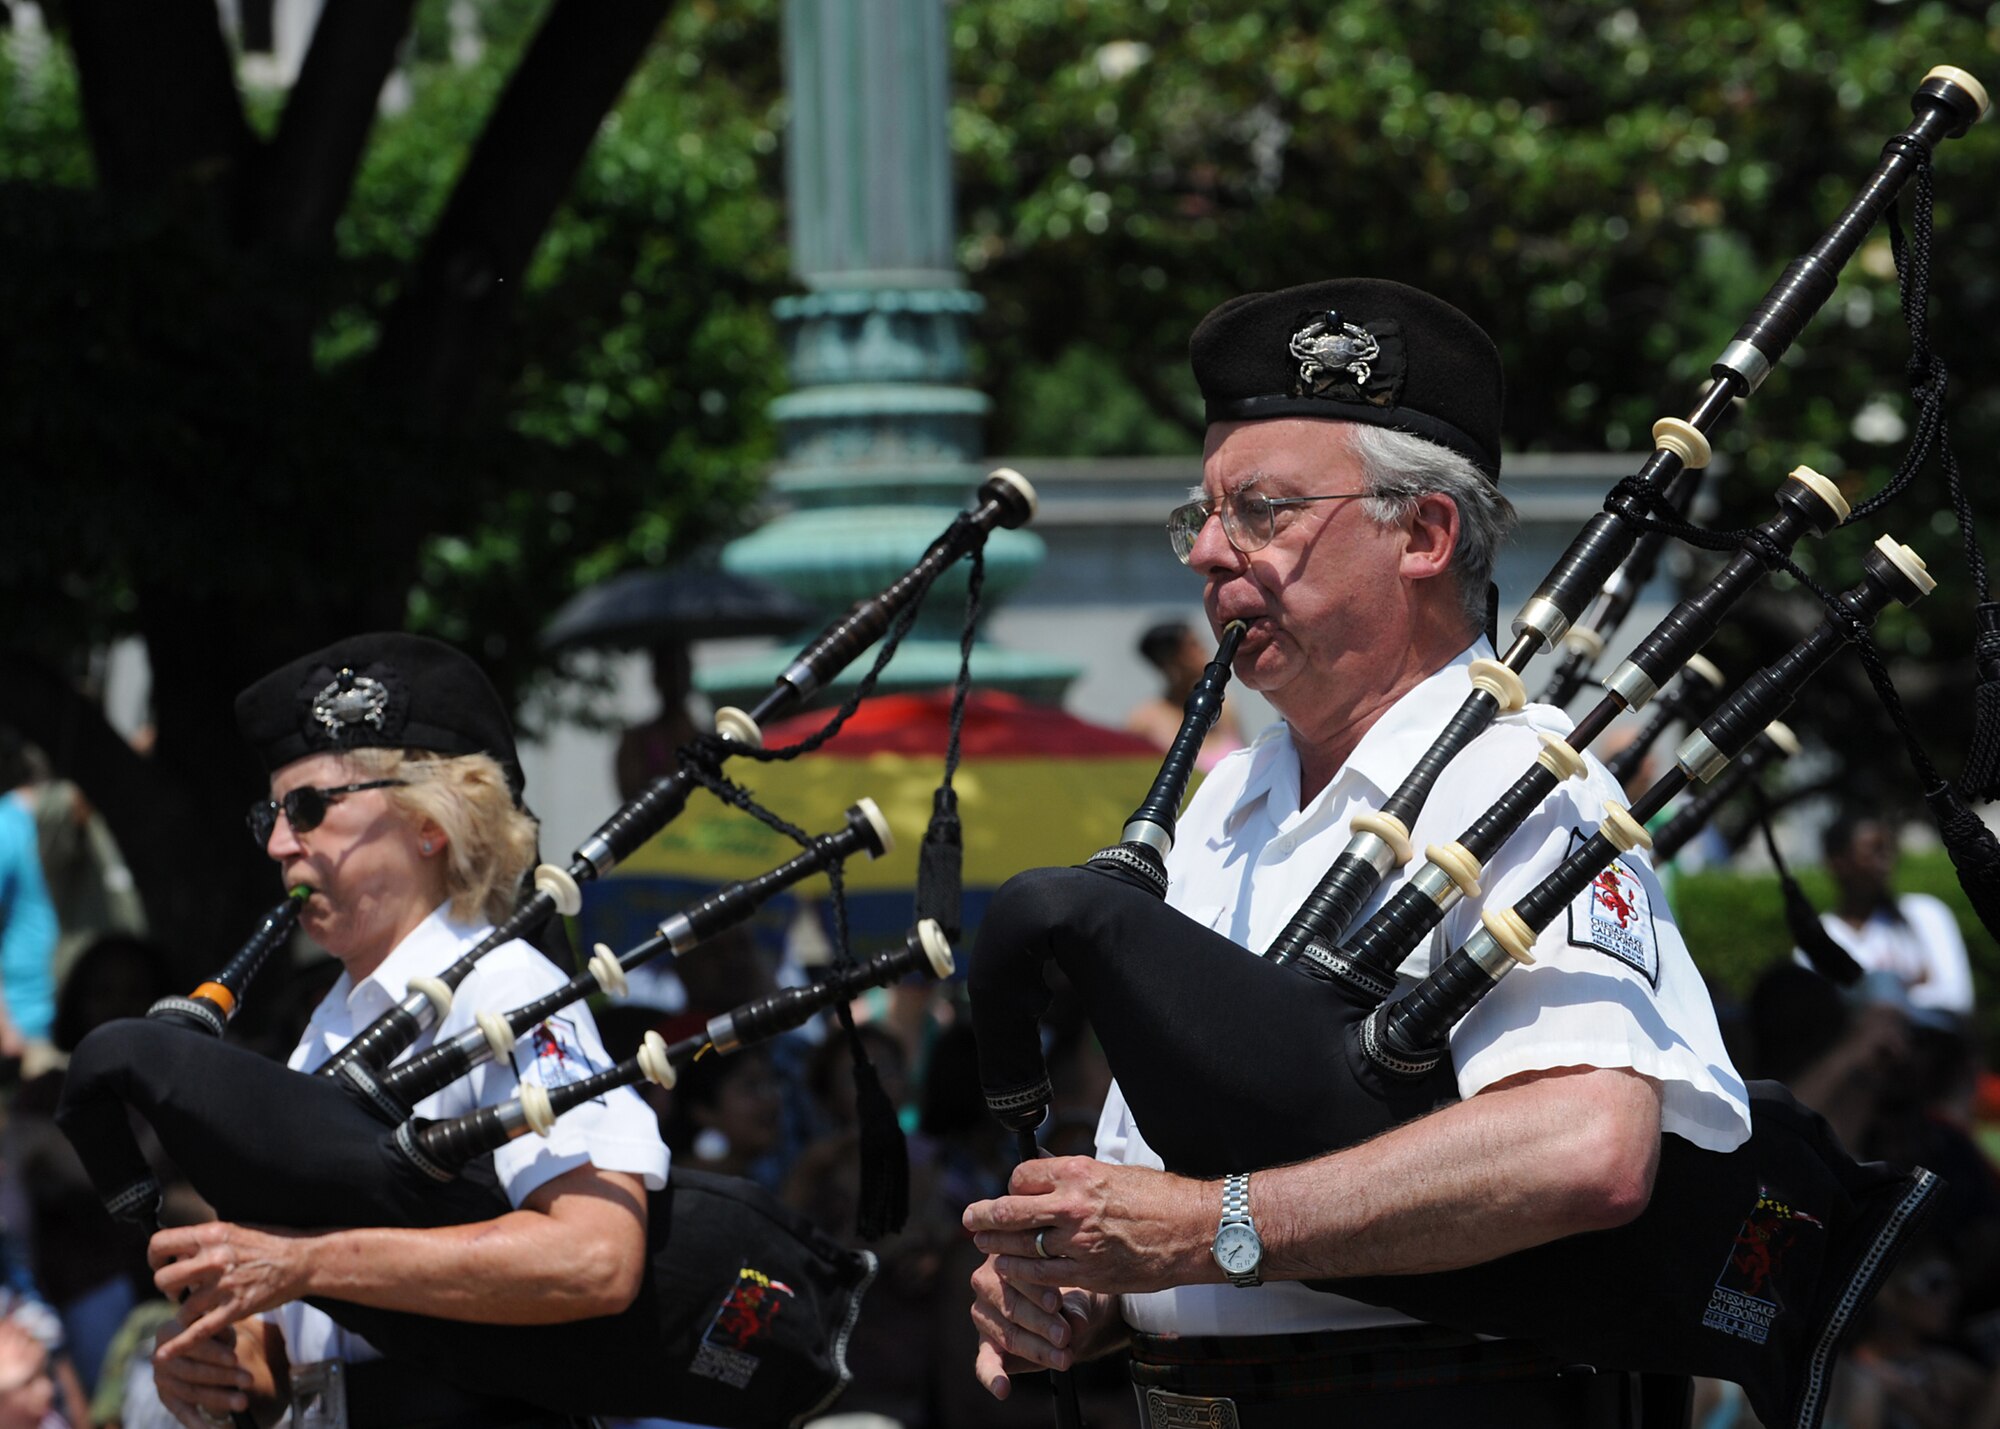 The Chesapeake Caledonian Pipes and Drums Band performs at the National Memorial Day Parade, May 28, 2012 in Washington D.C. The annual National Memorial Day Parade is an opportunity for thousands of patriotic Americans to come together and honor those who have sacrificed so much in service to our country.